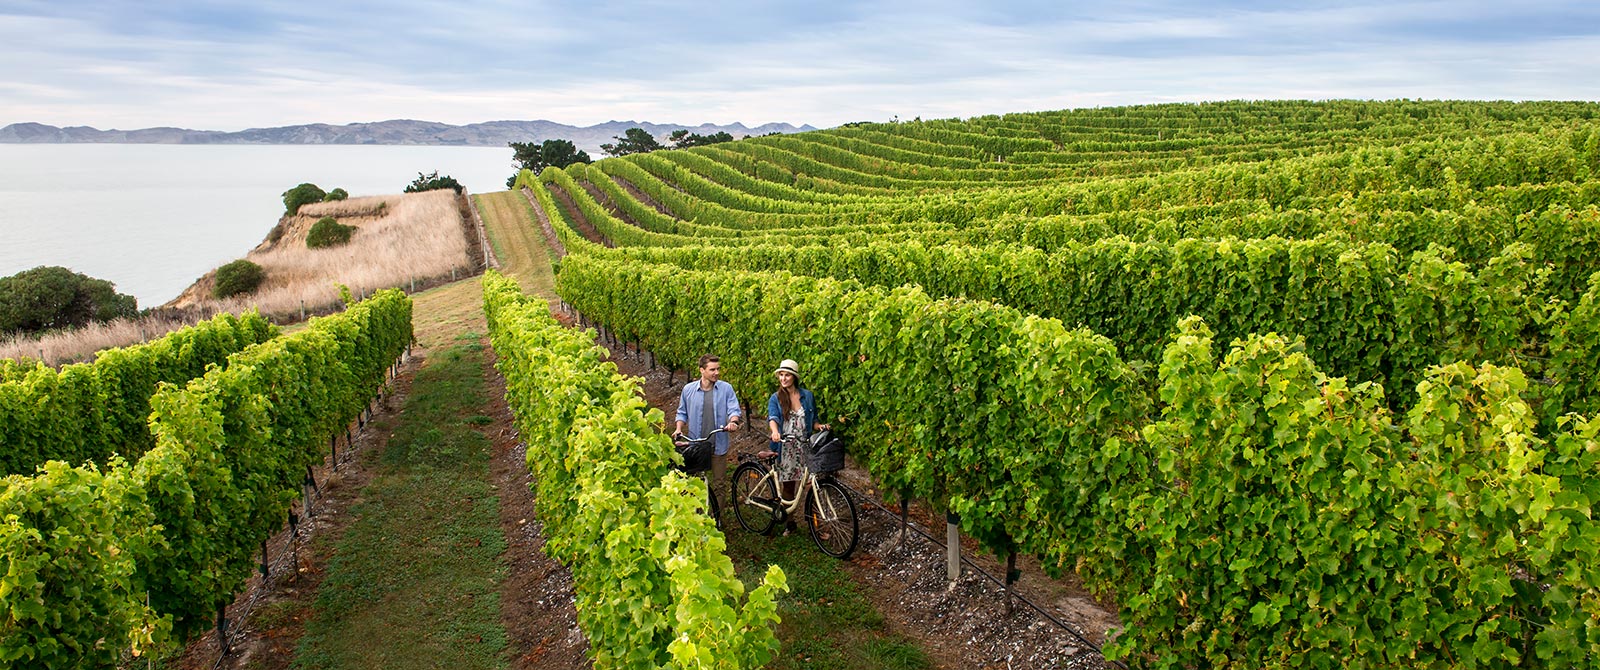 Cycling Among the Vines in Marlborough - Book Your Trip to New Zealand - New Zealand Travel Agency